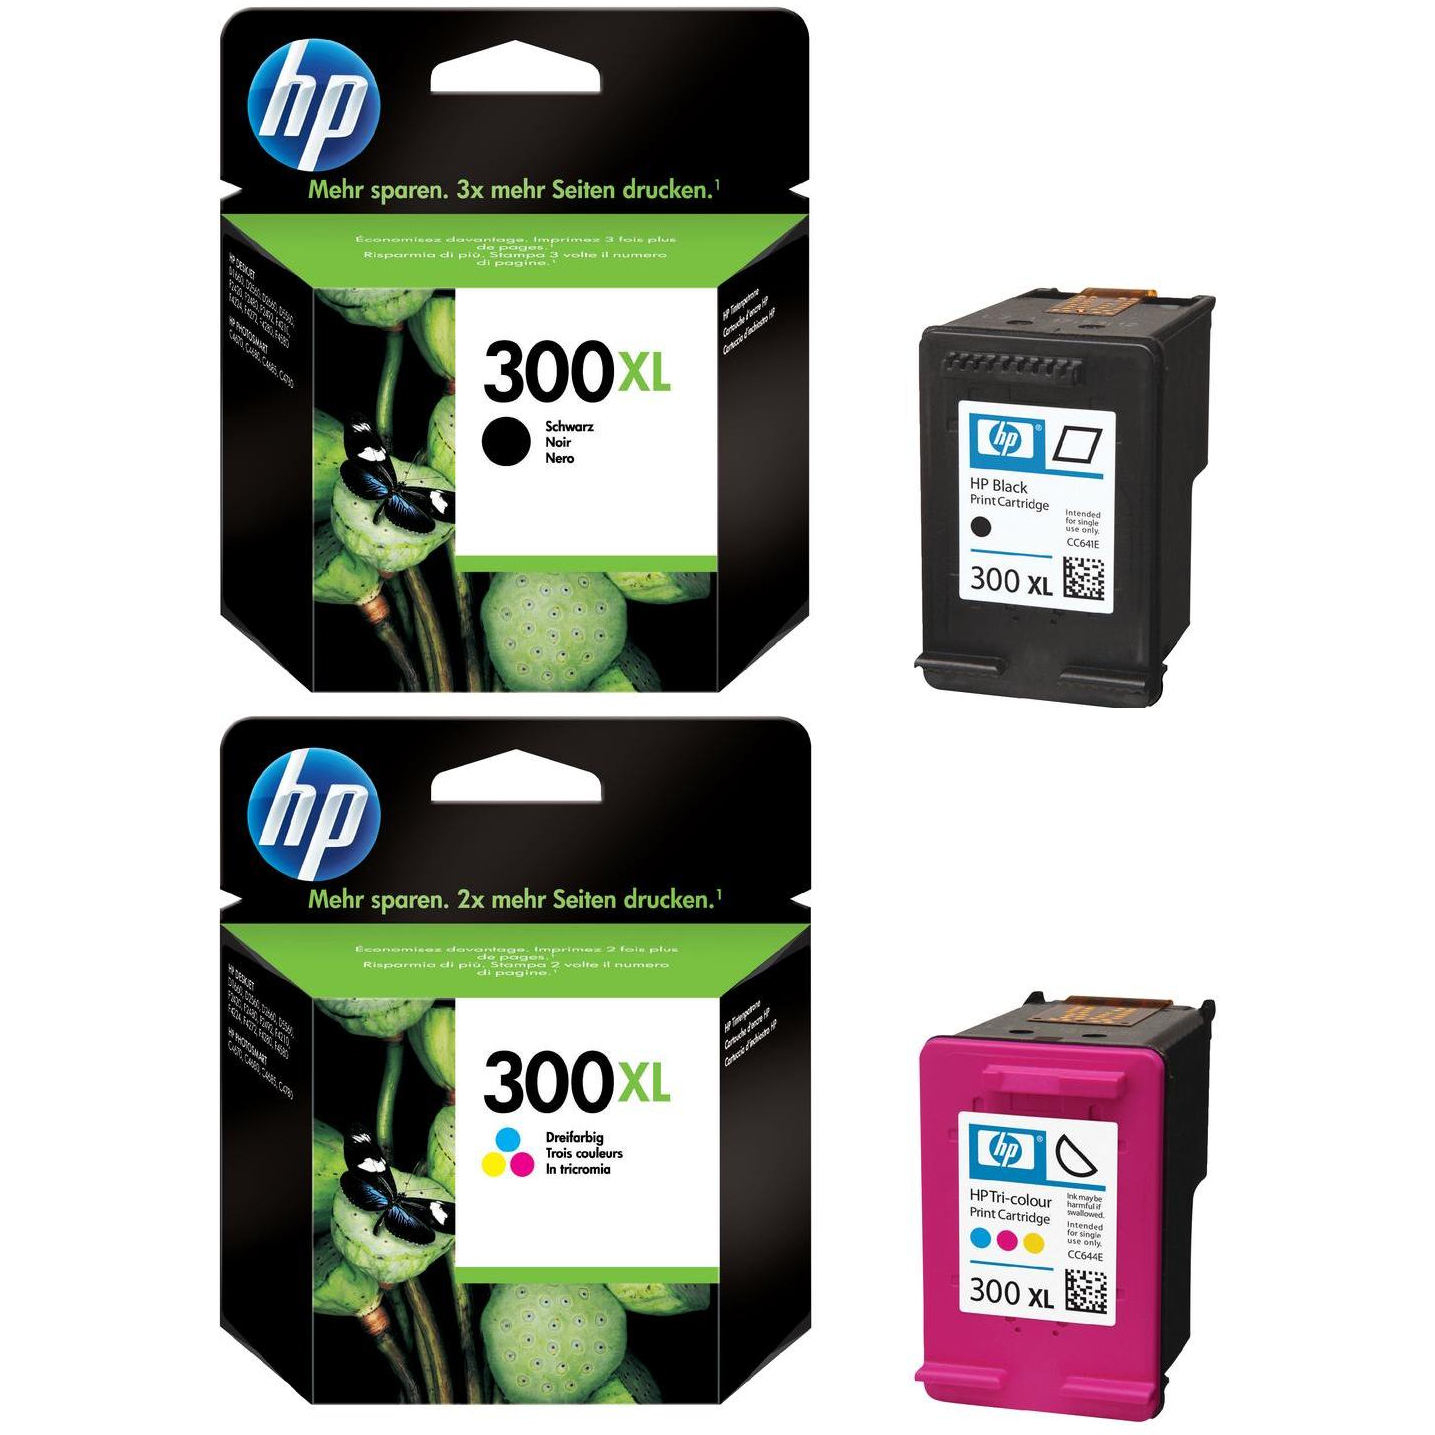 Related to HP F4280 Ink: HP-300XL-Pack